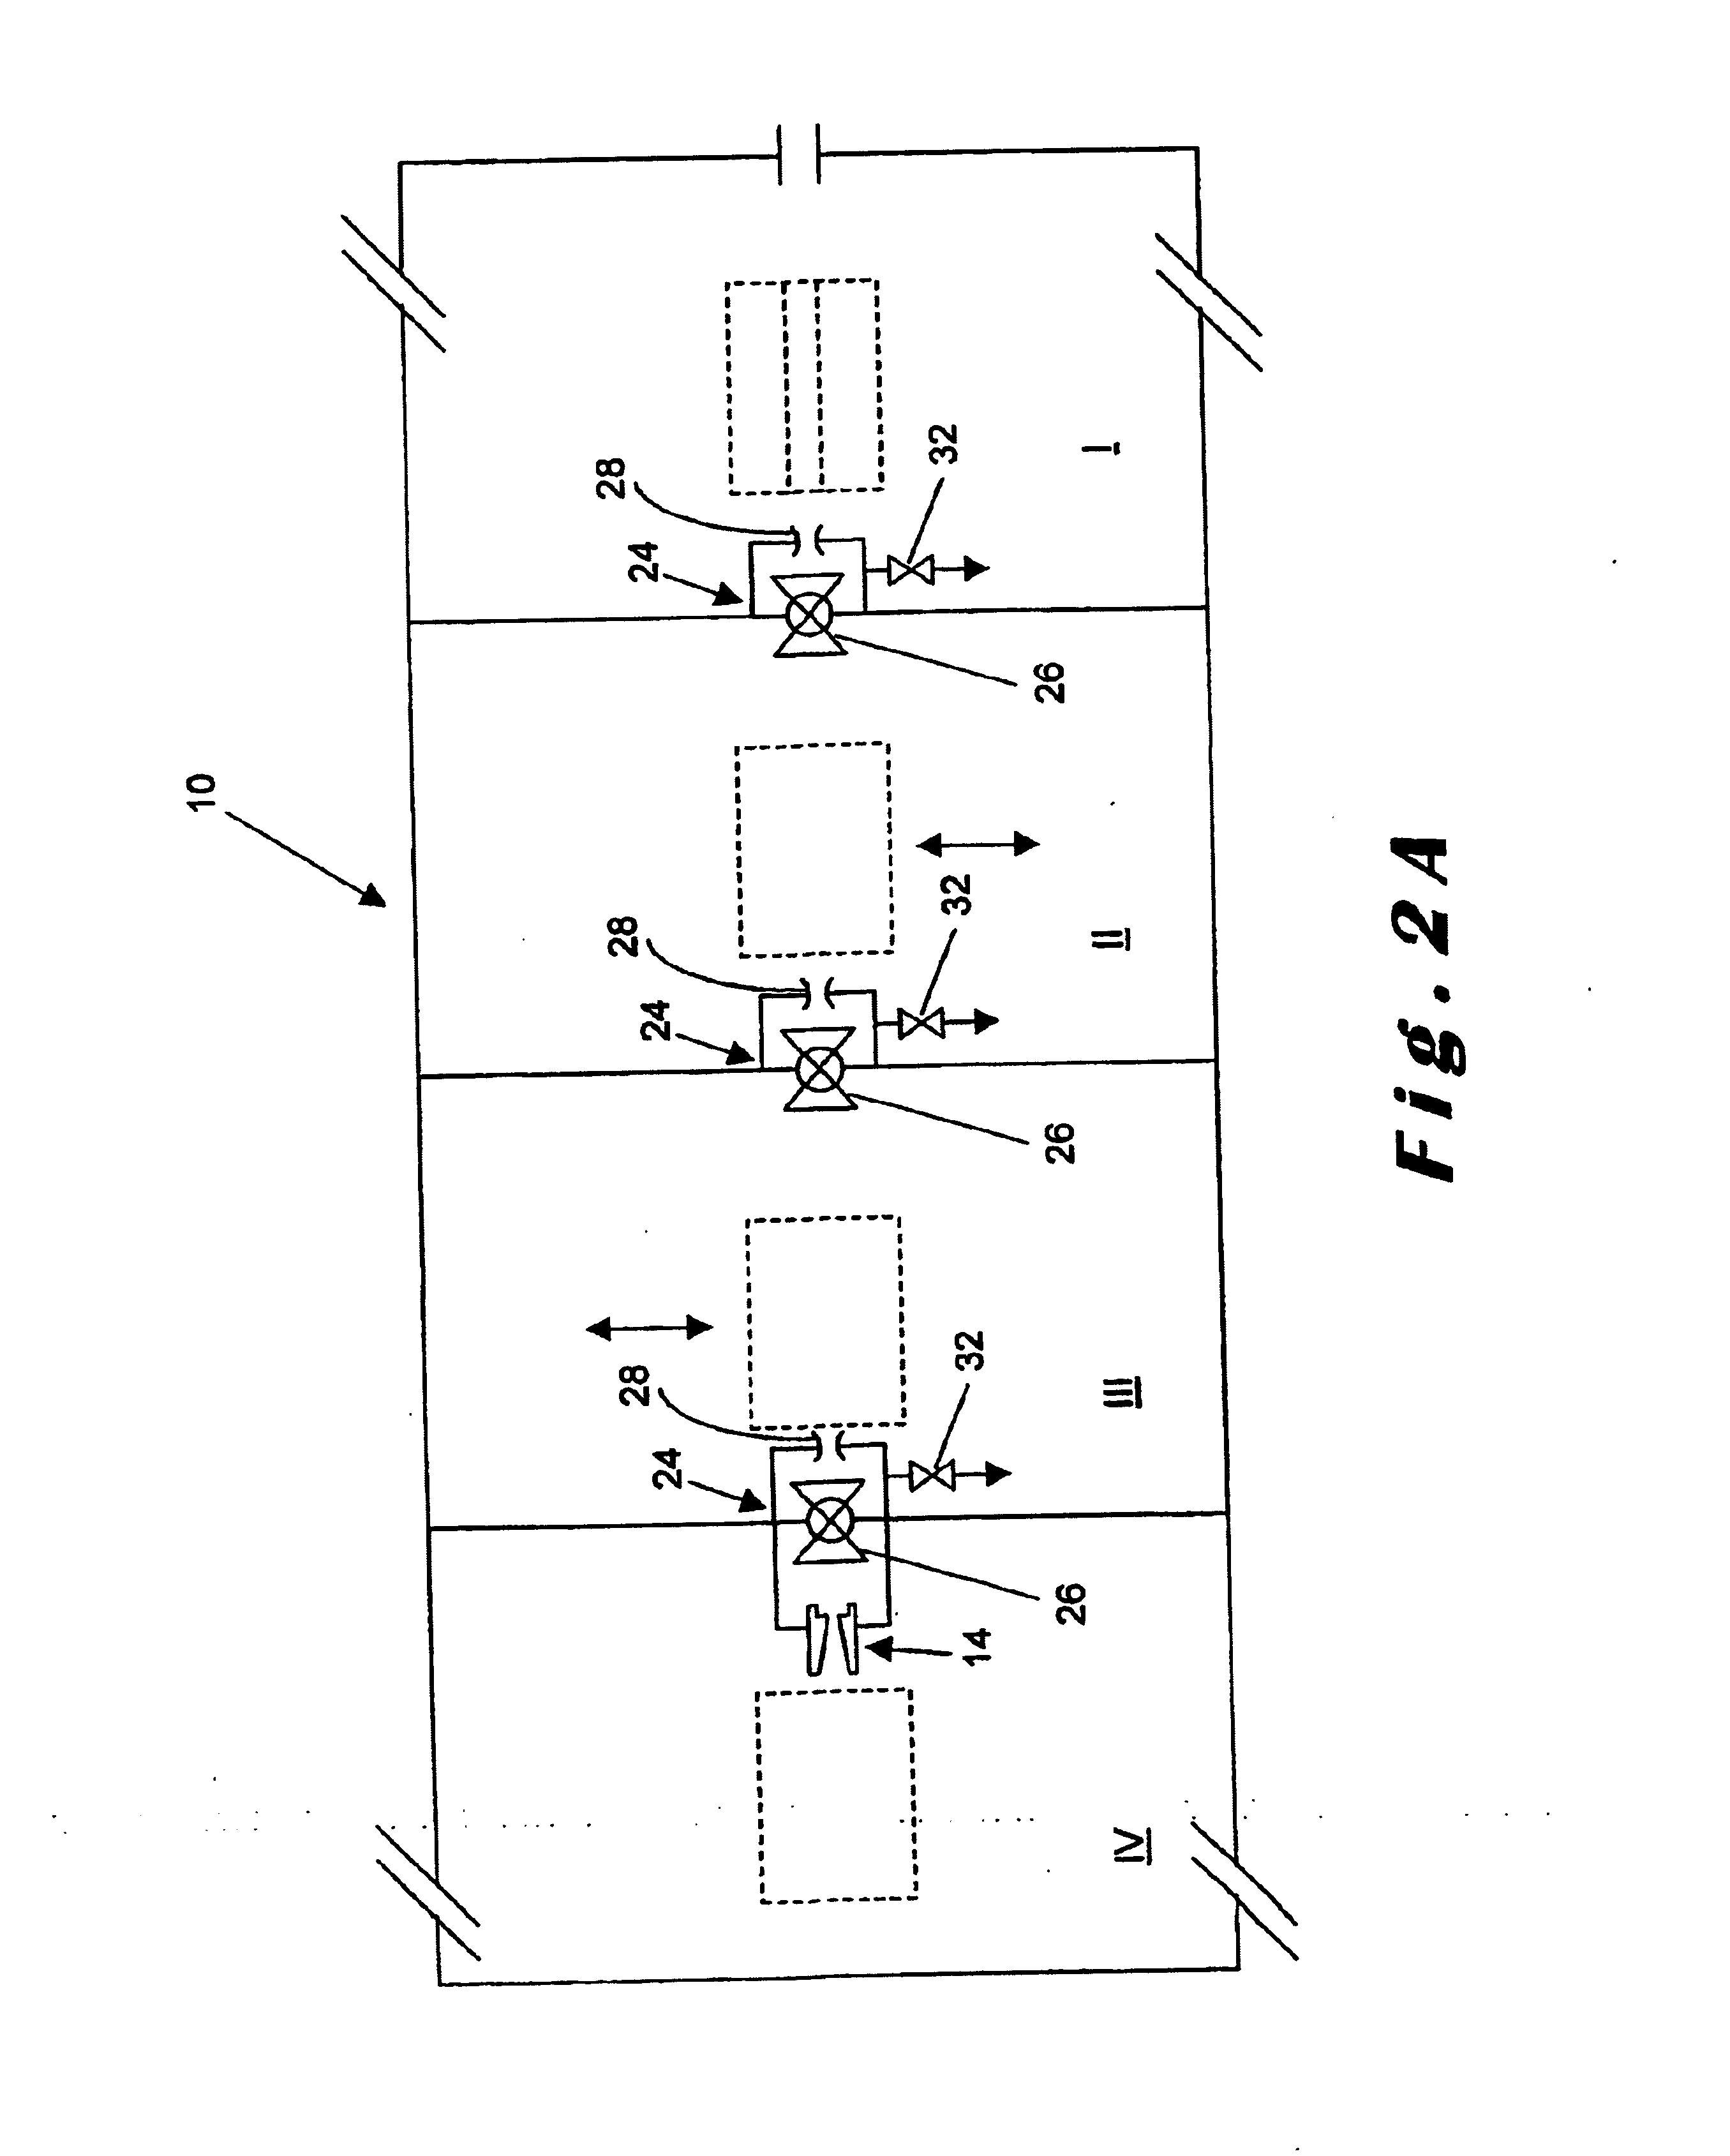 Method and device for manufacturing non-contaminated mox fuel rods